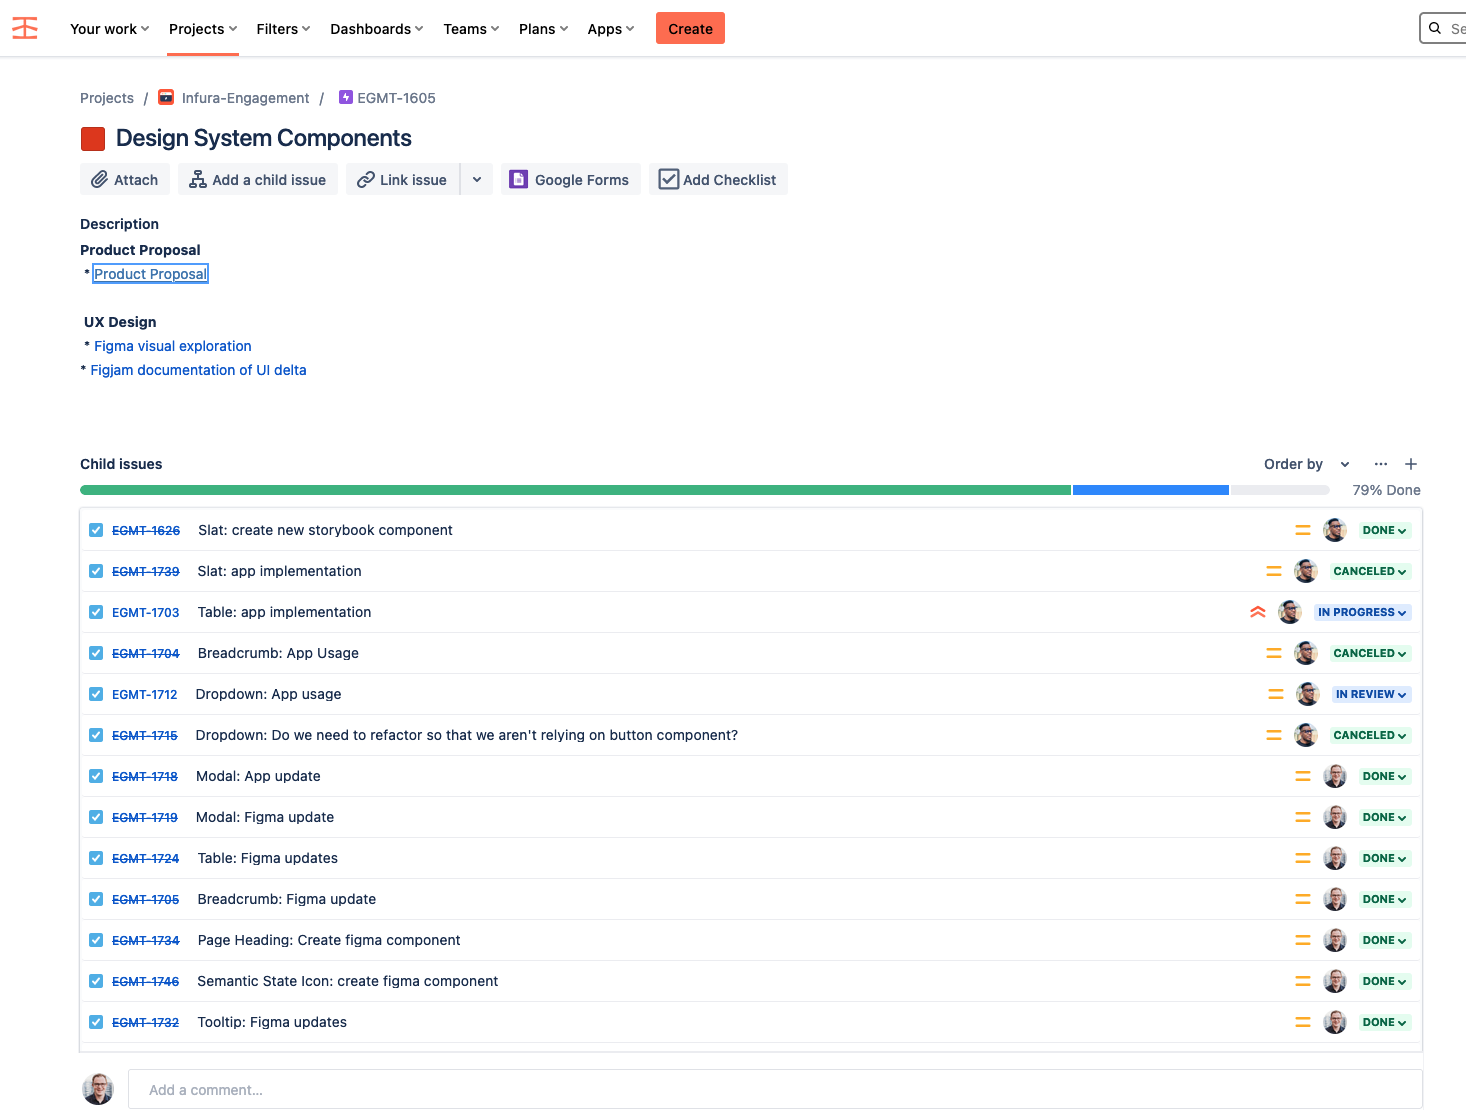 Screenshot of the project tickets in Jira